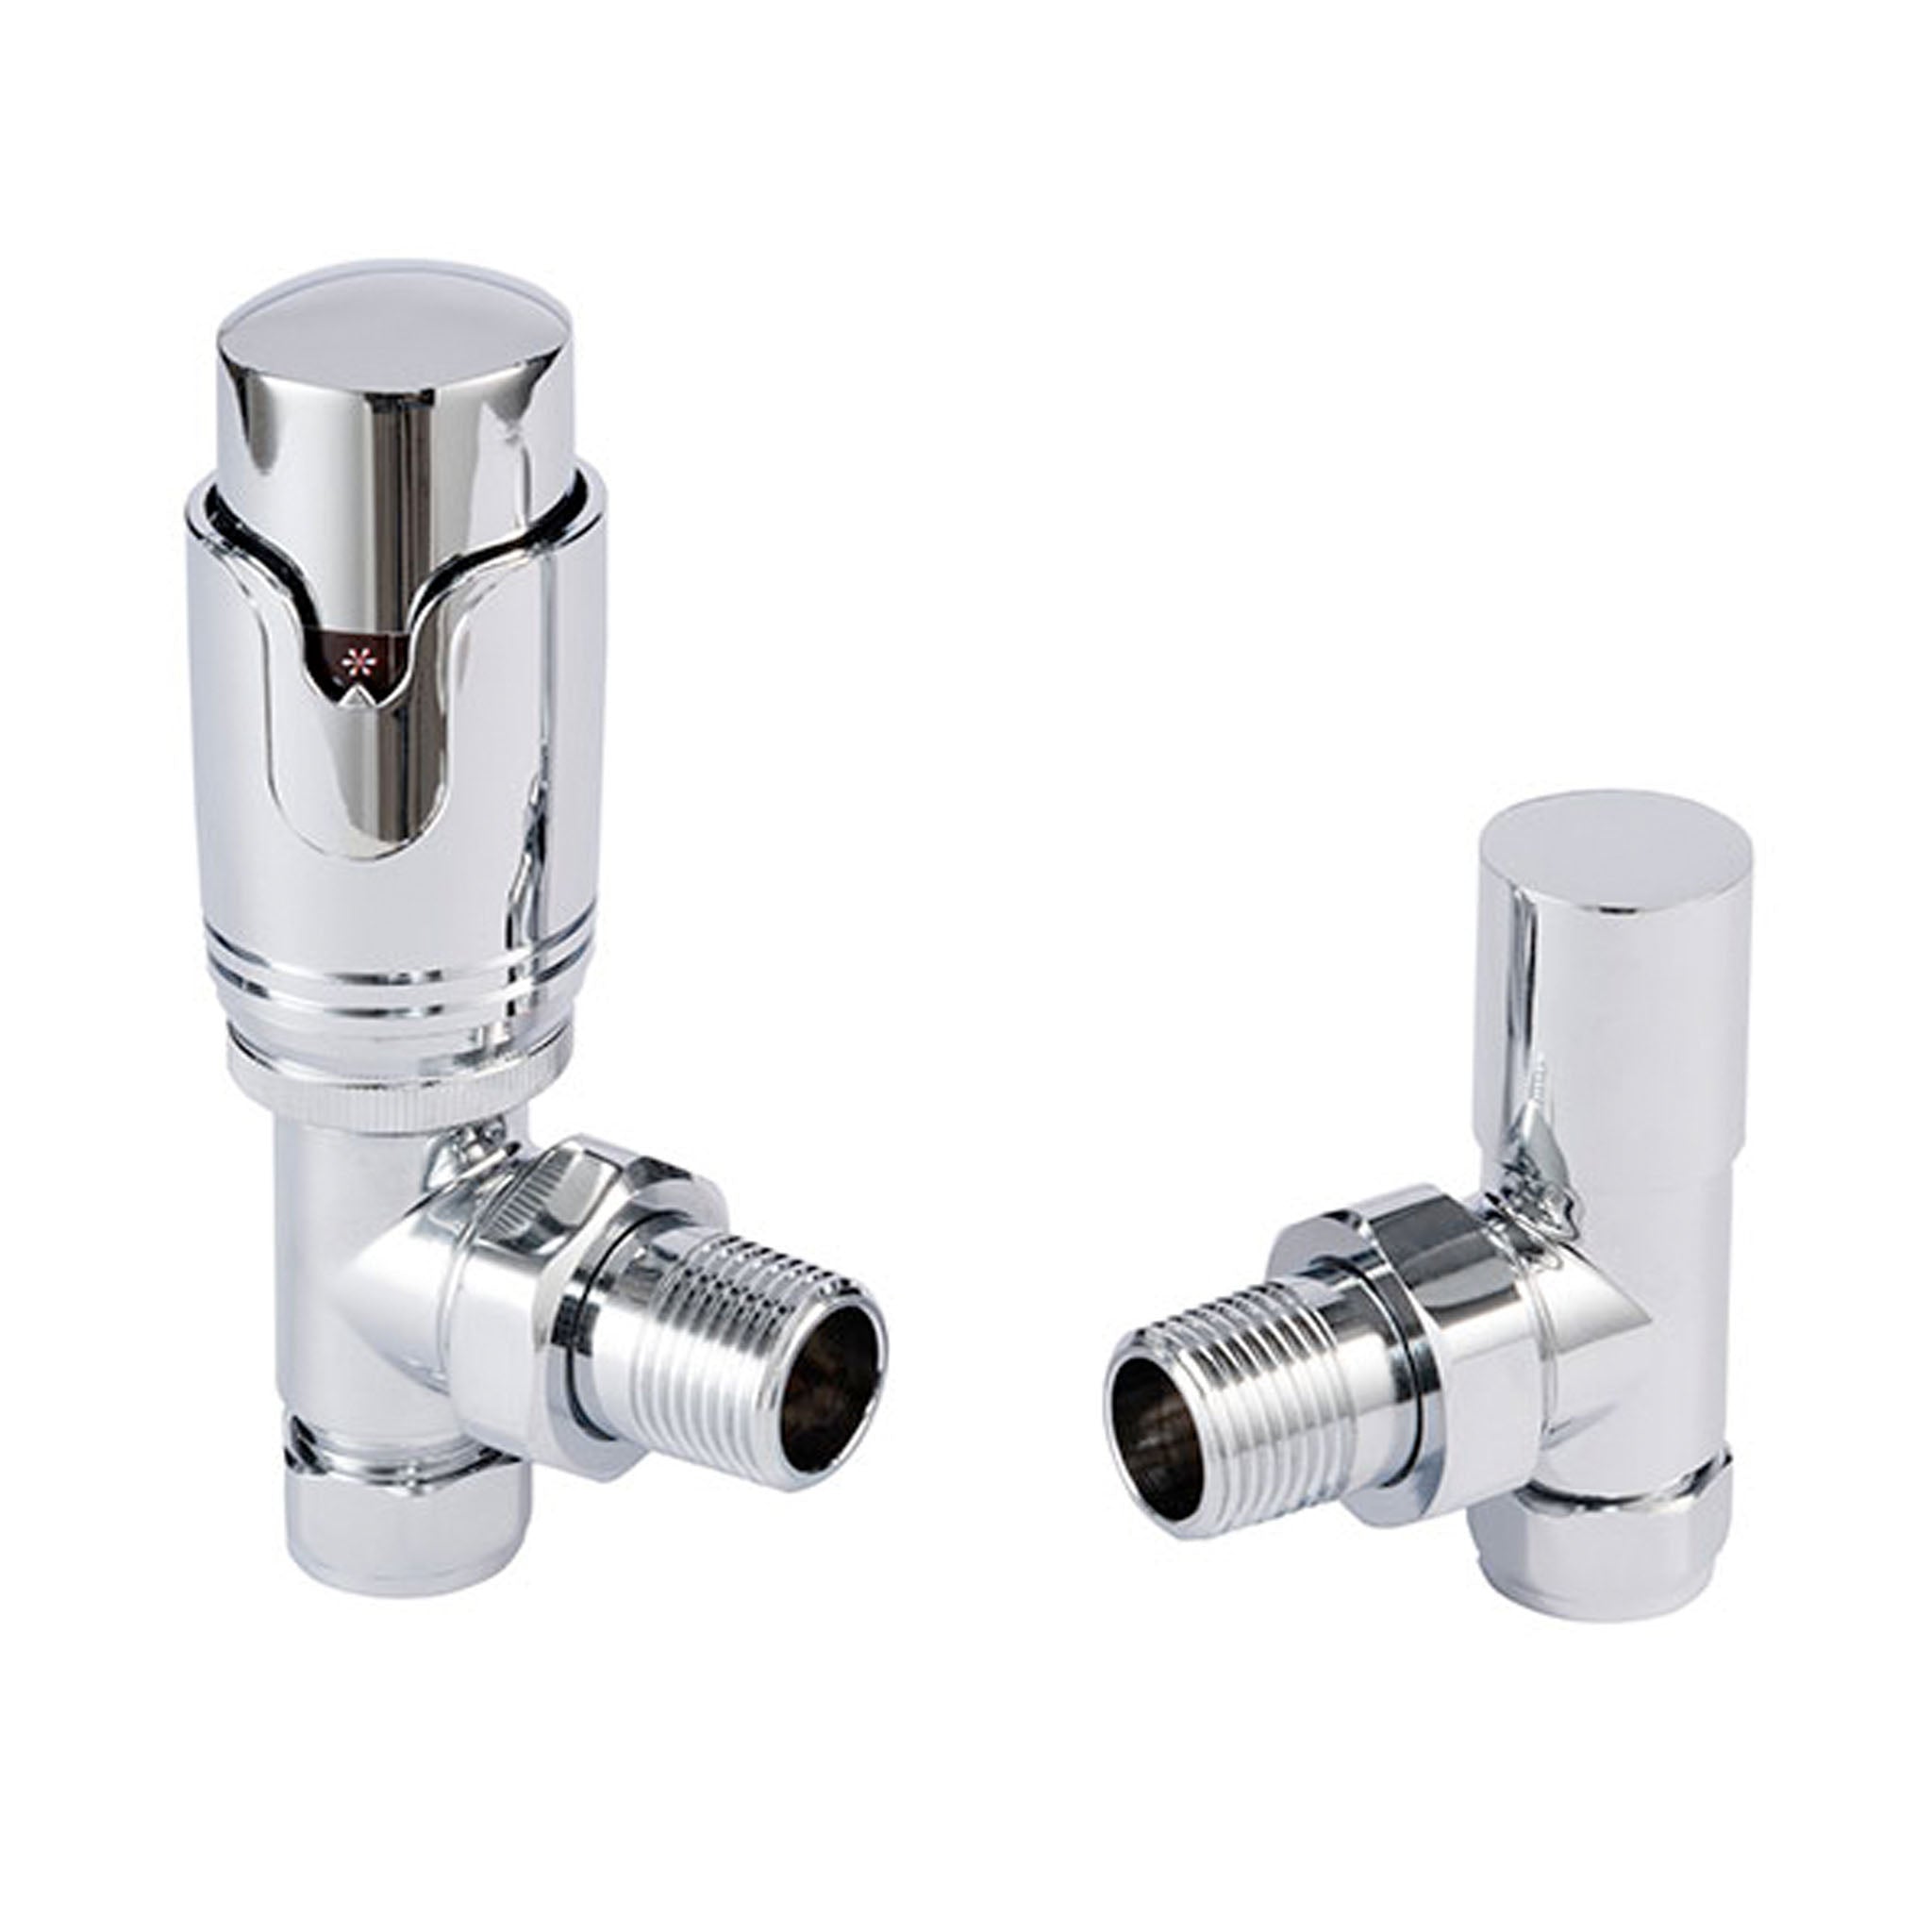 Vogue Arne Thermostatic Angled Valves 1/2" x 15mm (Pair)